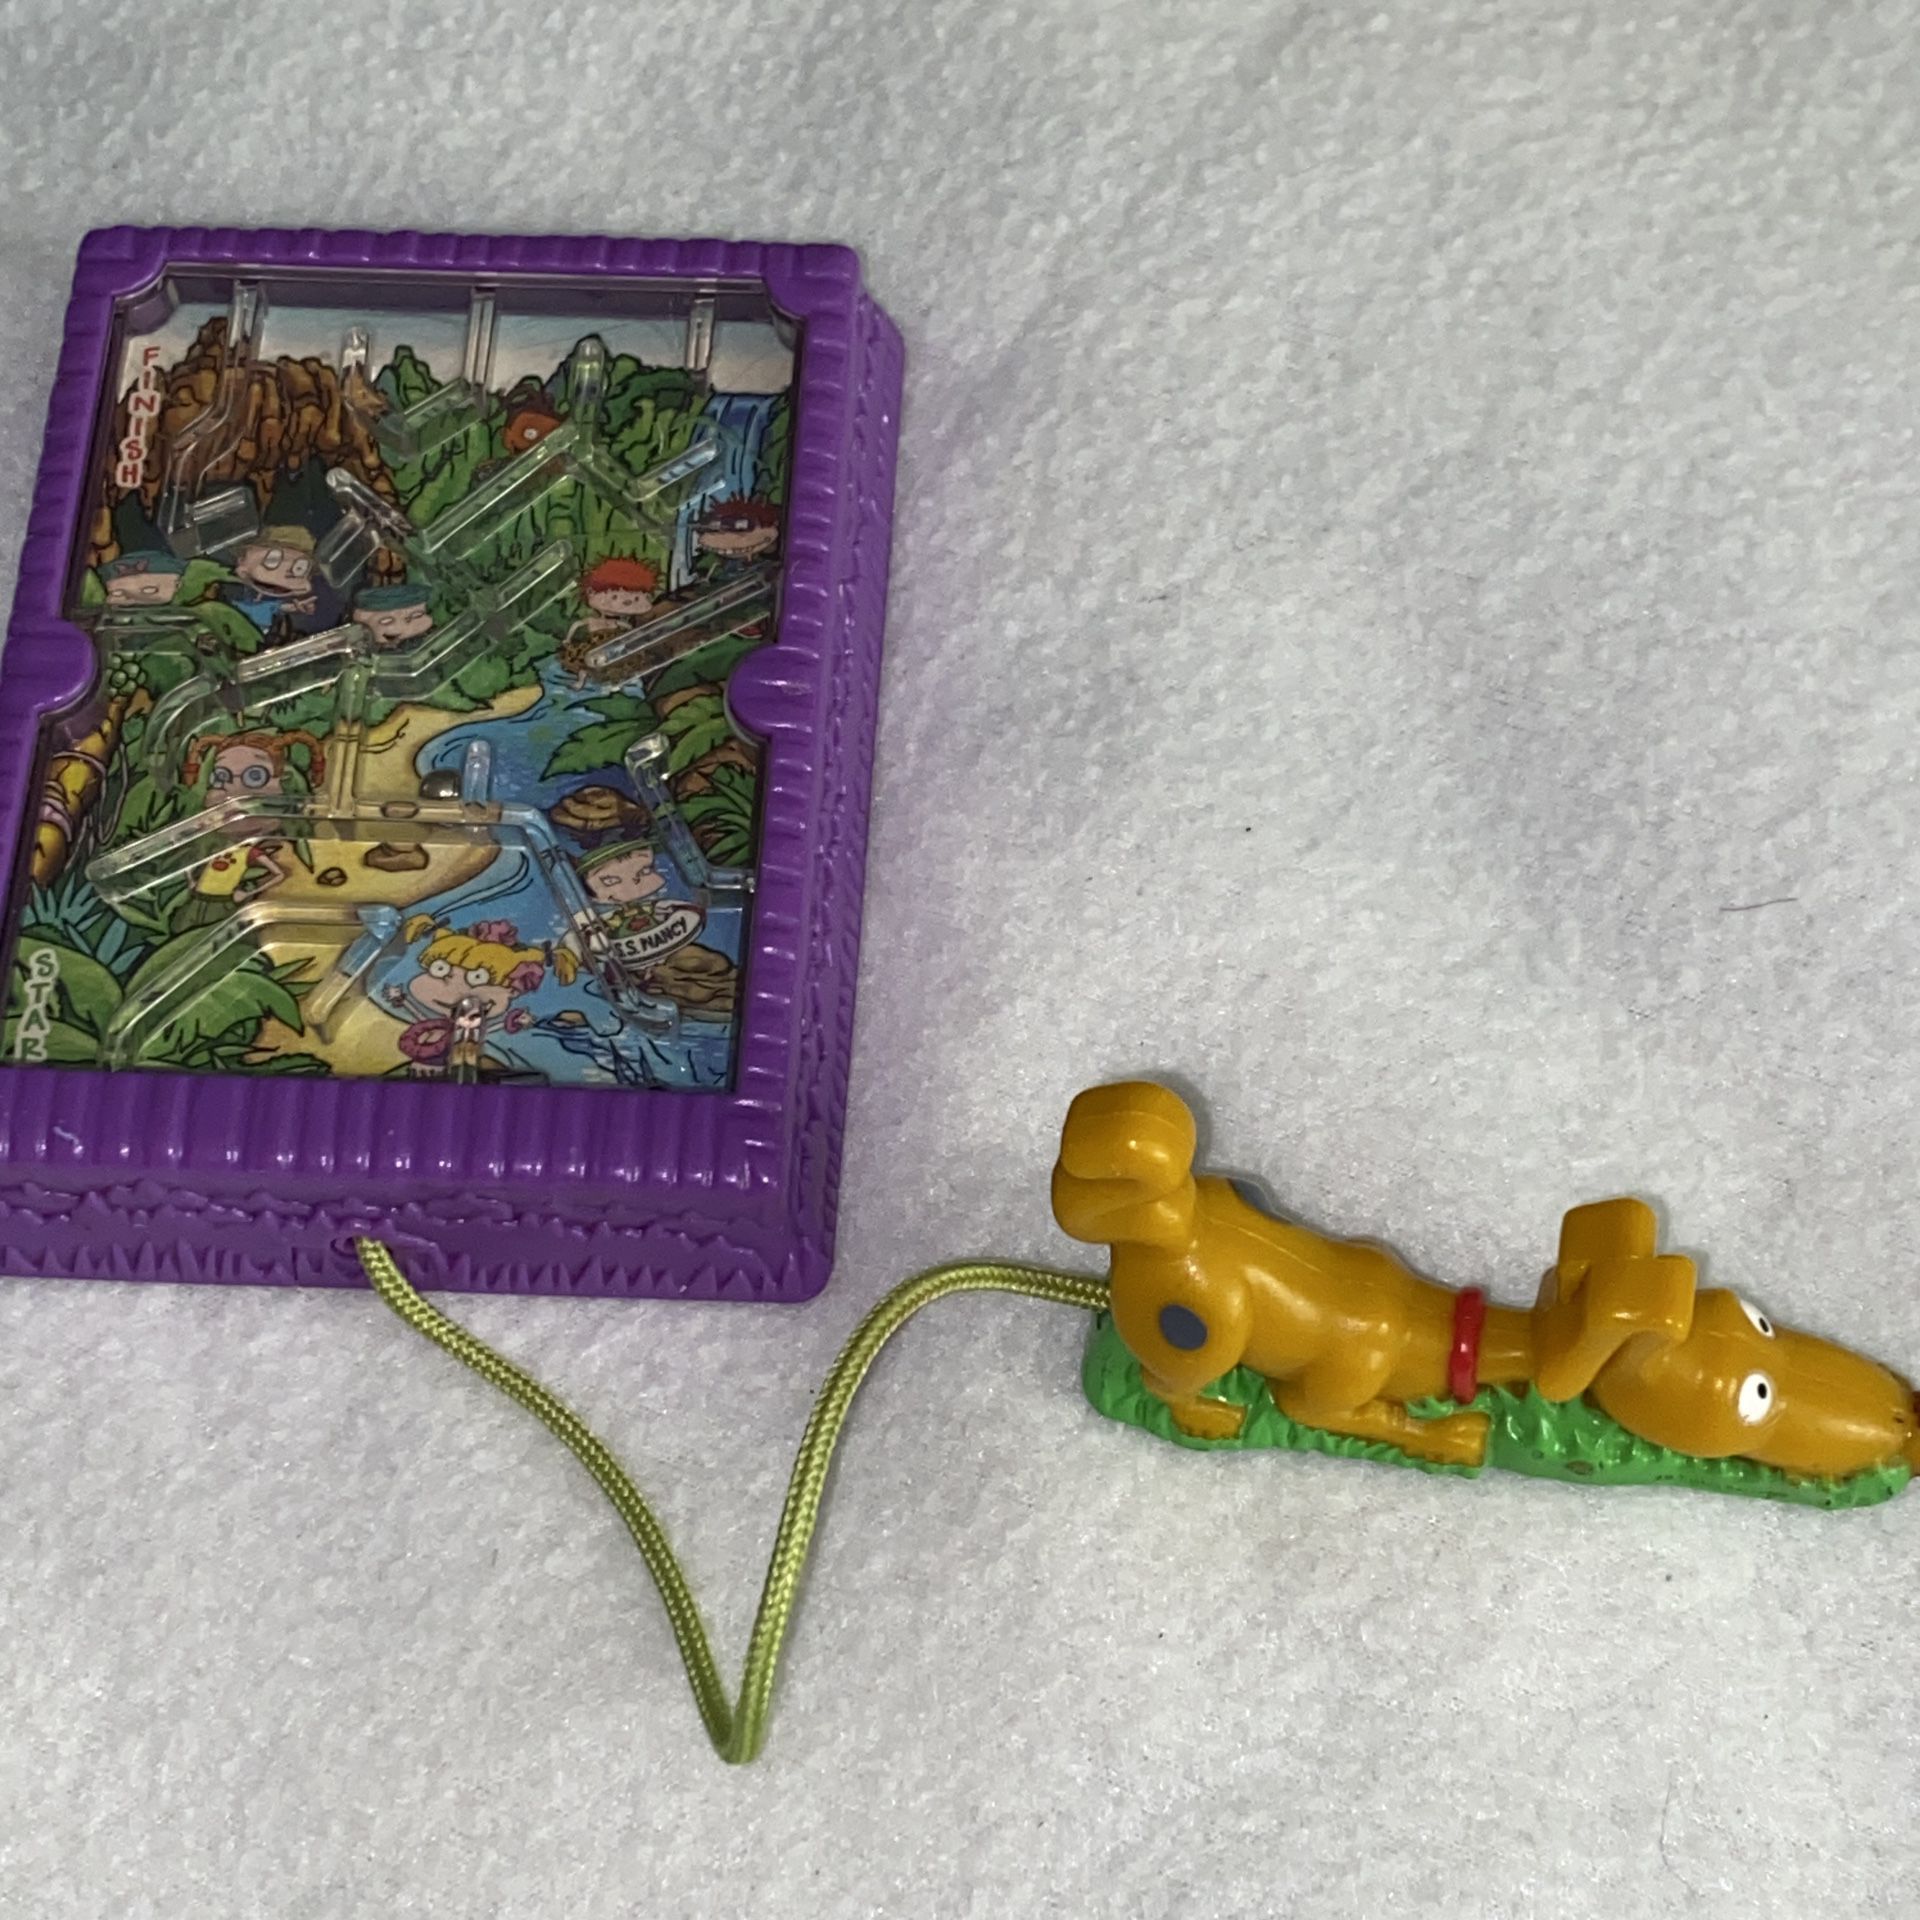 2003 Burger King Kids Meal Toy Rugrats Movie Dog Spike Game Magnet Maze Puzzle Happy Meal Toy B017